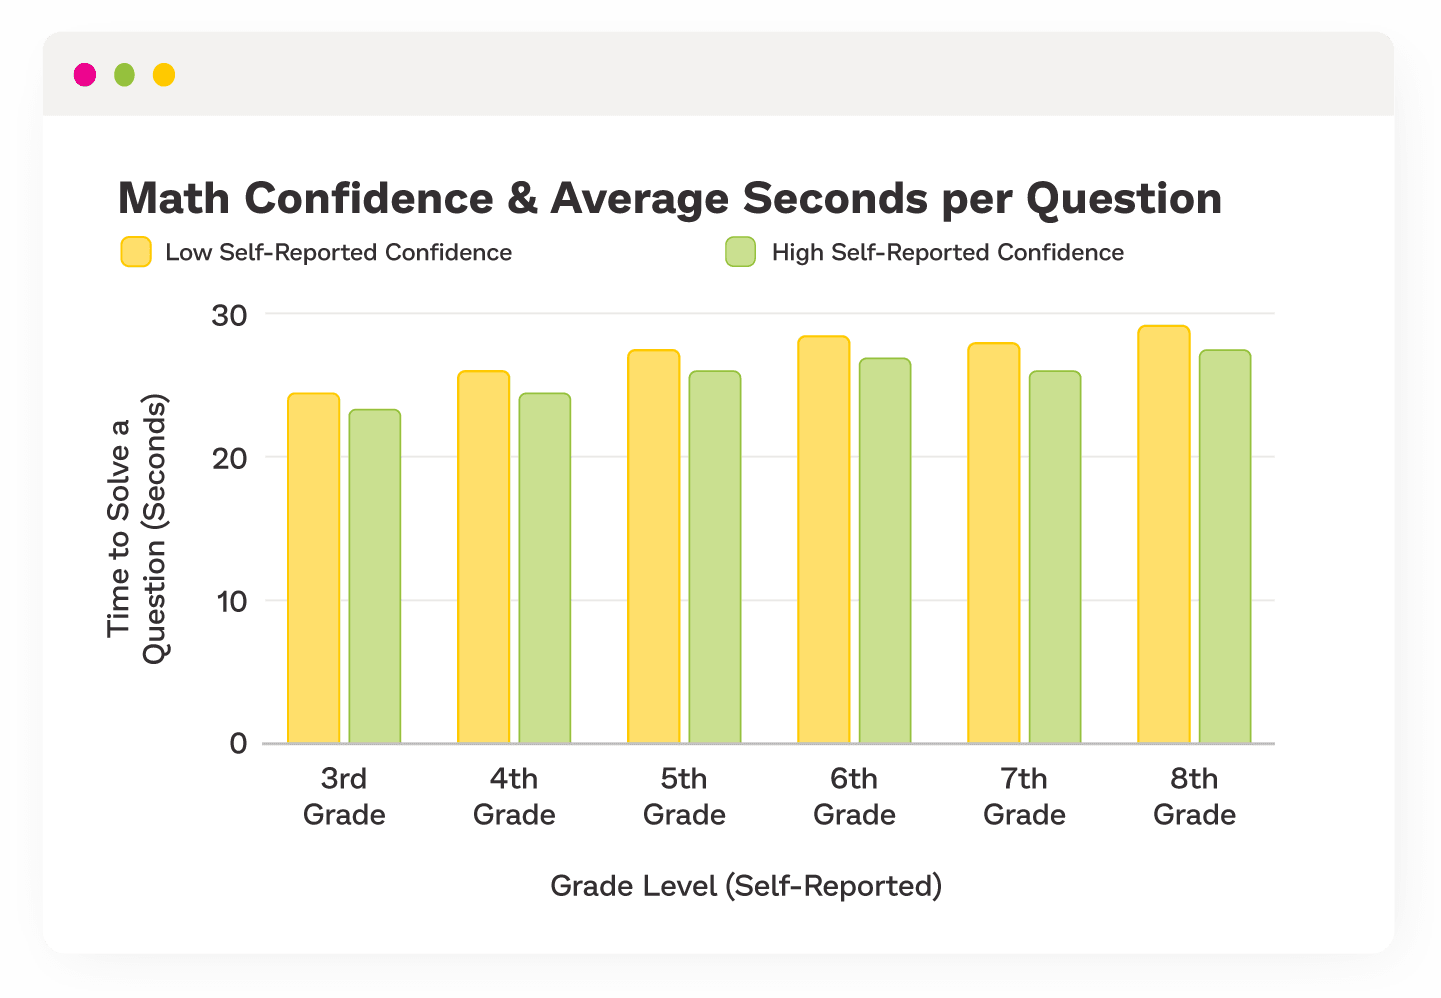 Bar chart broken down by grade showing the time to solve a question in seconds, comparing self-reported high confidence with self-reported low confidence. 